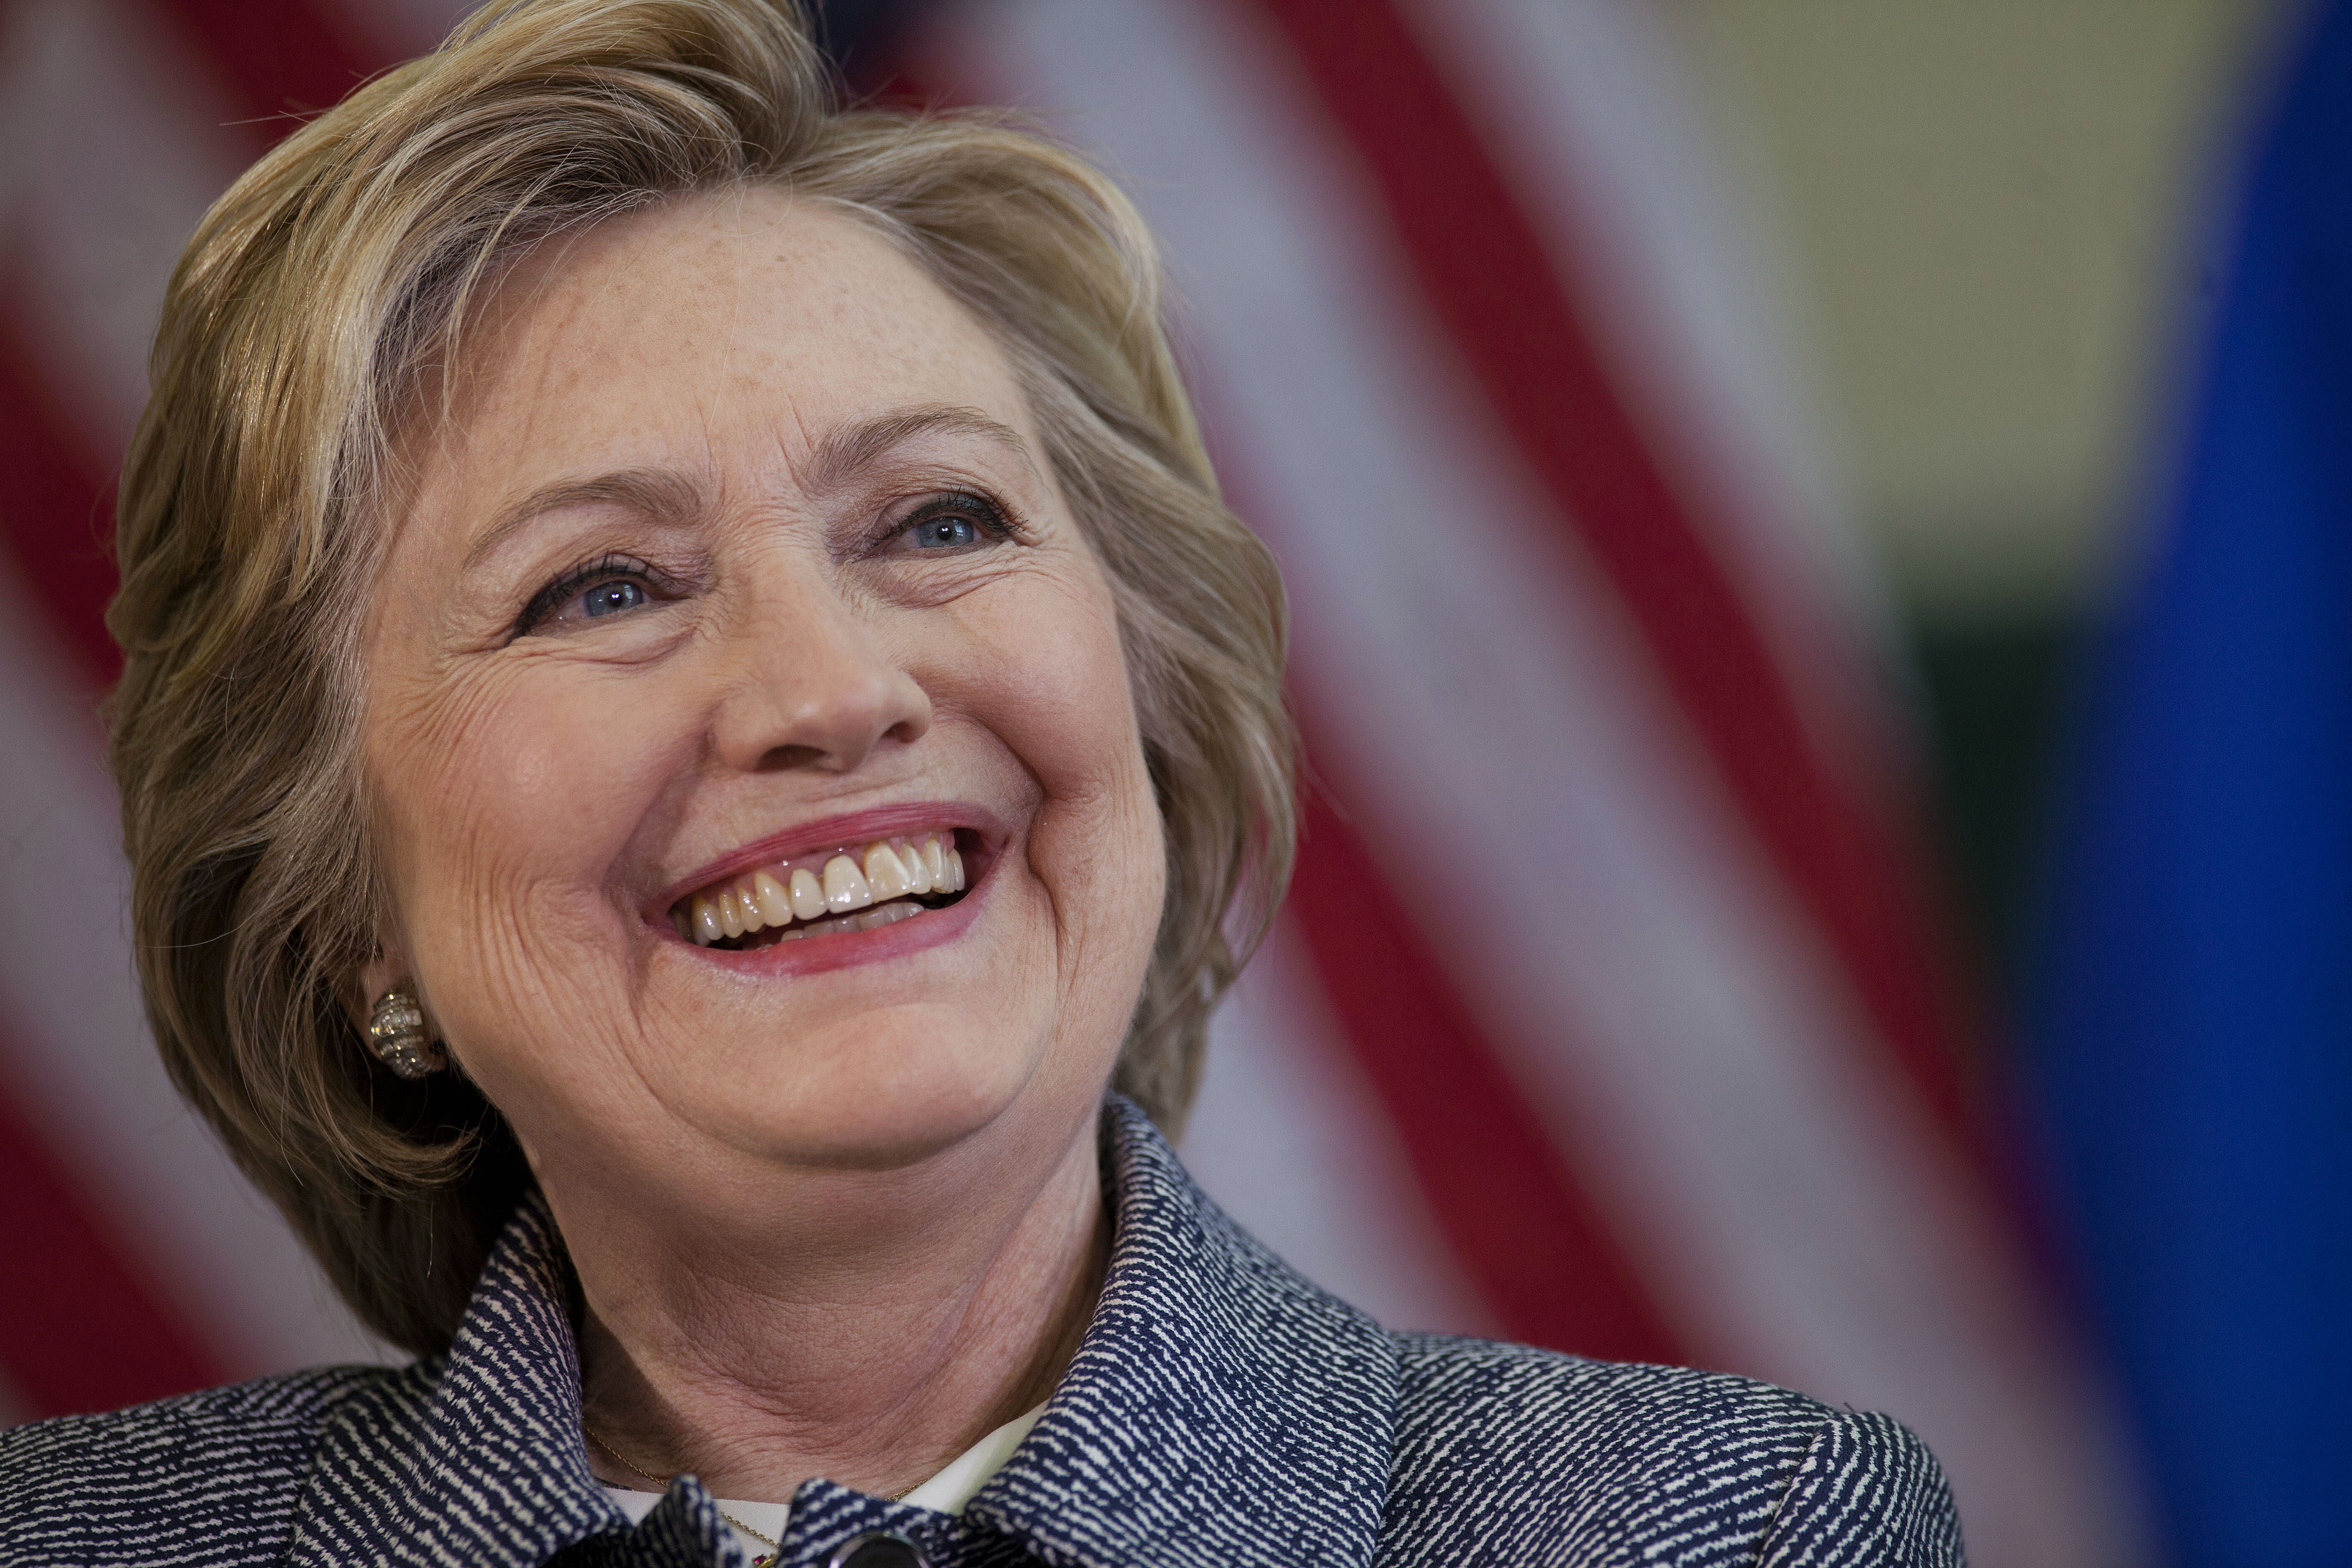 Hillary Clinton, former Secretary of State and 2016 Democratic presidential candidate, smiles while speaking during a campaign event in Hartford, CT on April 21, 2016. (Bloomberg/Getty Images)